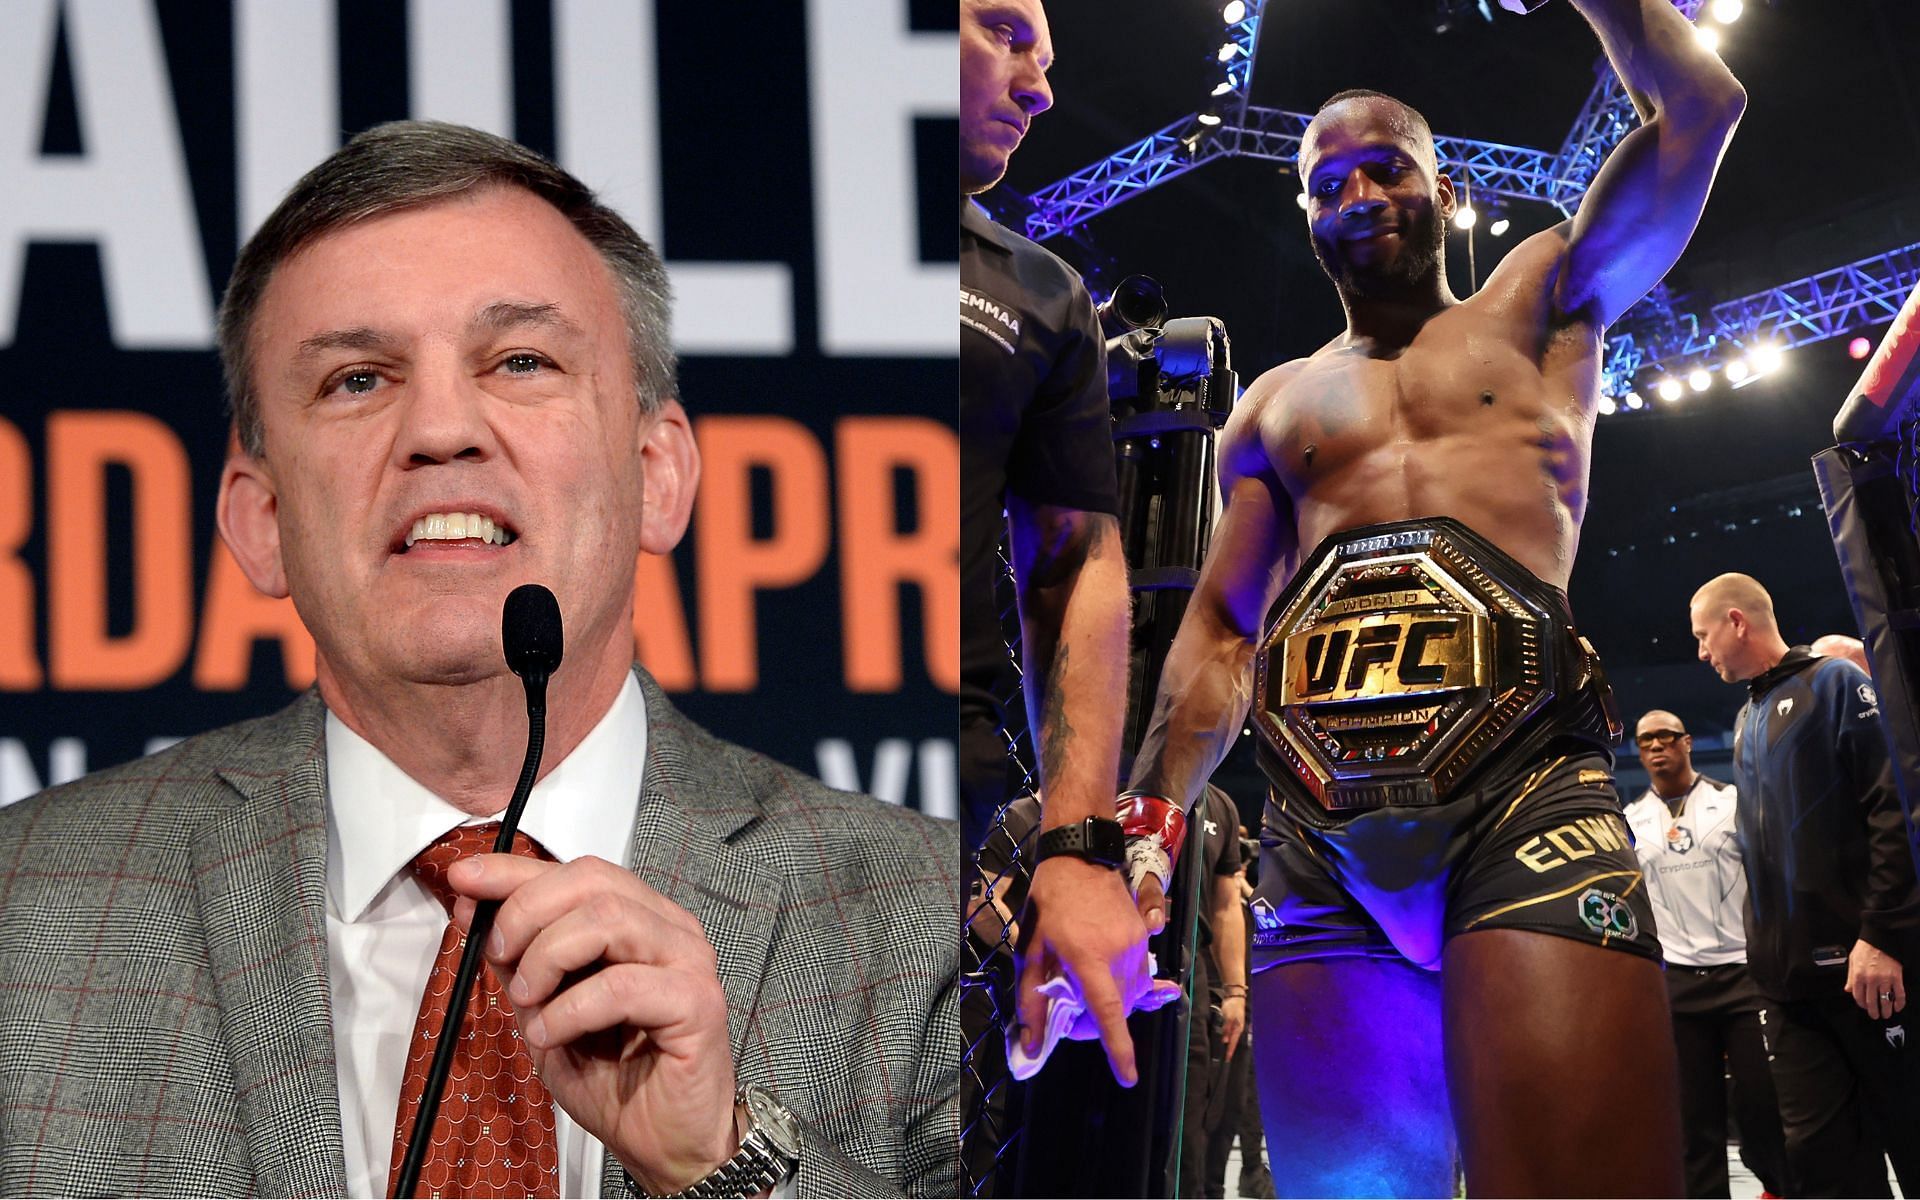 Teddy Atlas (left) and Leon Edwards (right) (Image credits Getty Images)